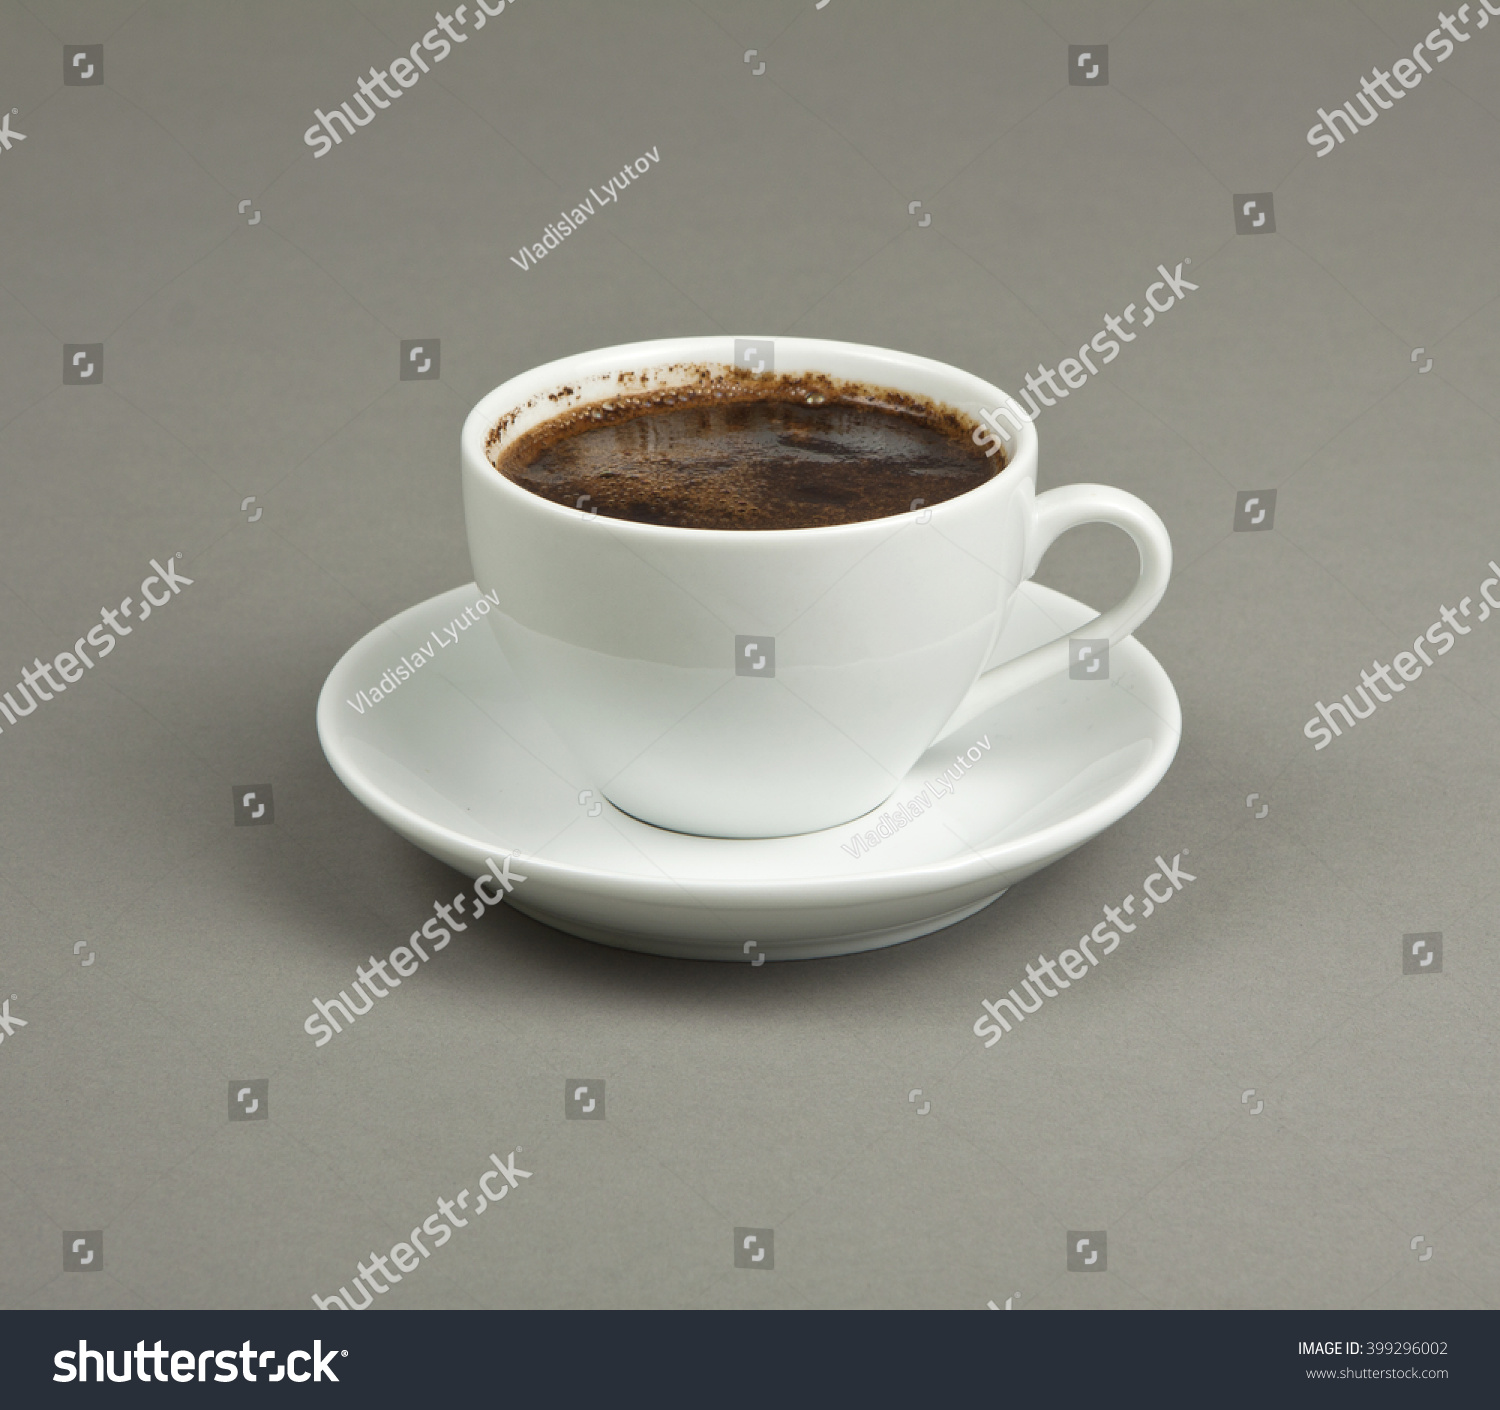 Cup of coffee and saucer on a gray background #399296002